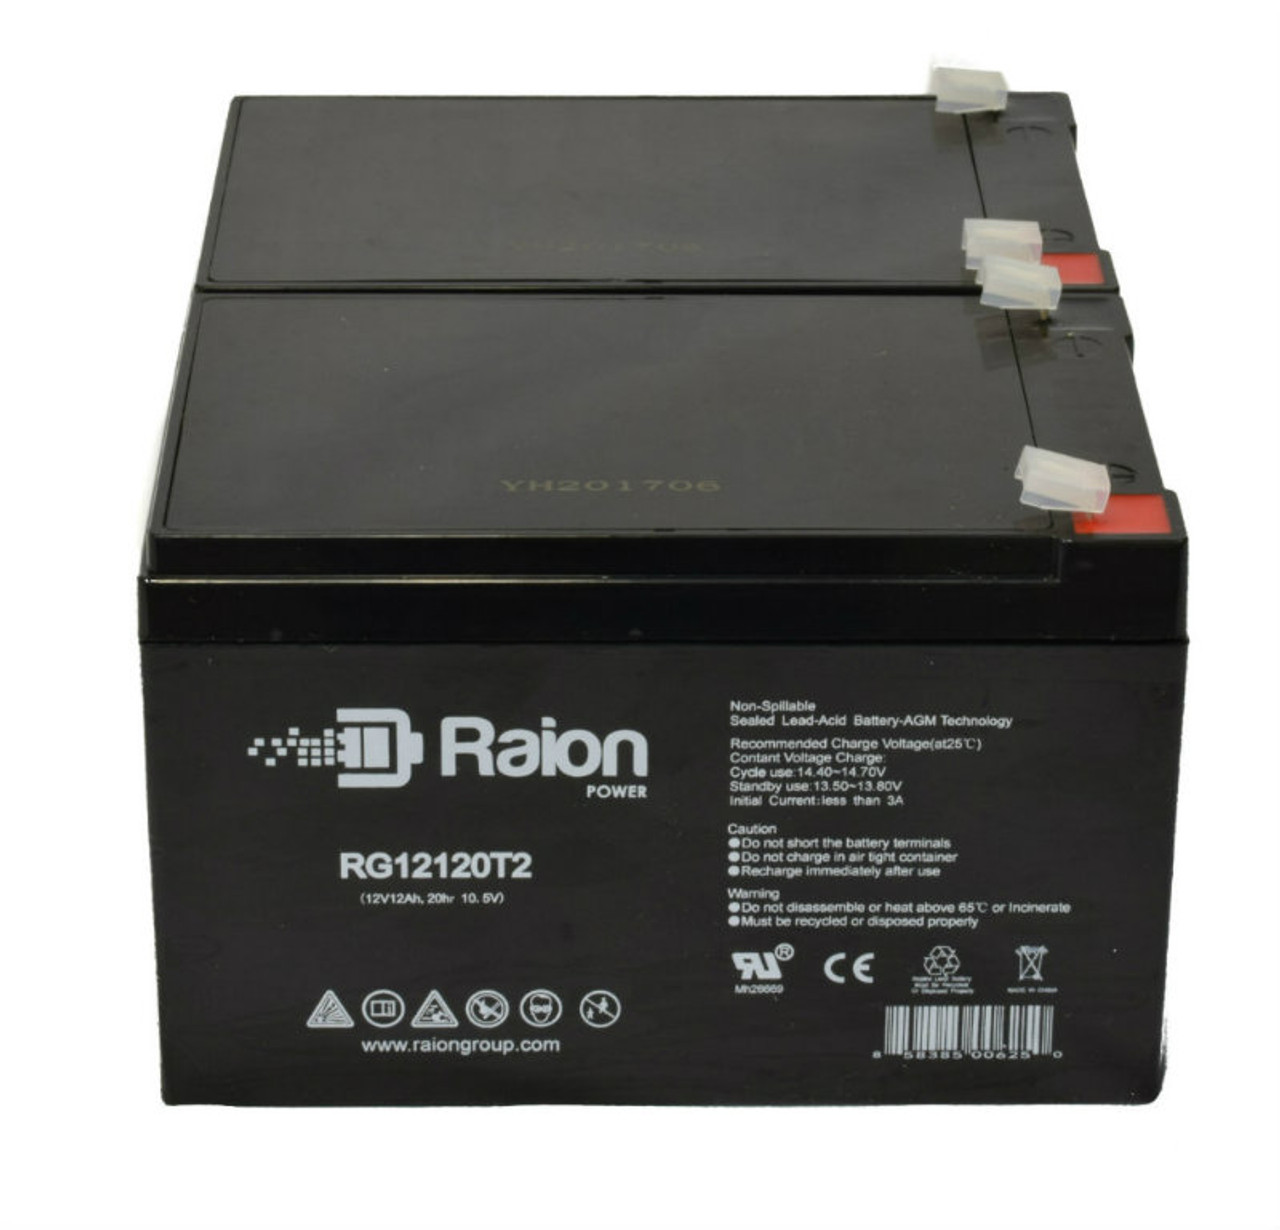 Raion Power RG12120T2 Replacement Fire Alarm Control Panel Battery for Altronix AL1012ULXPD4CB - 2 Pack